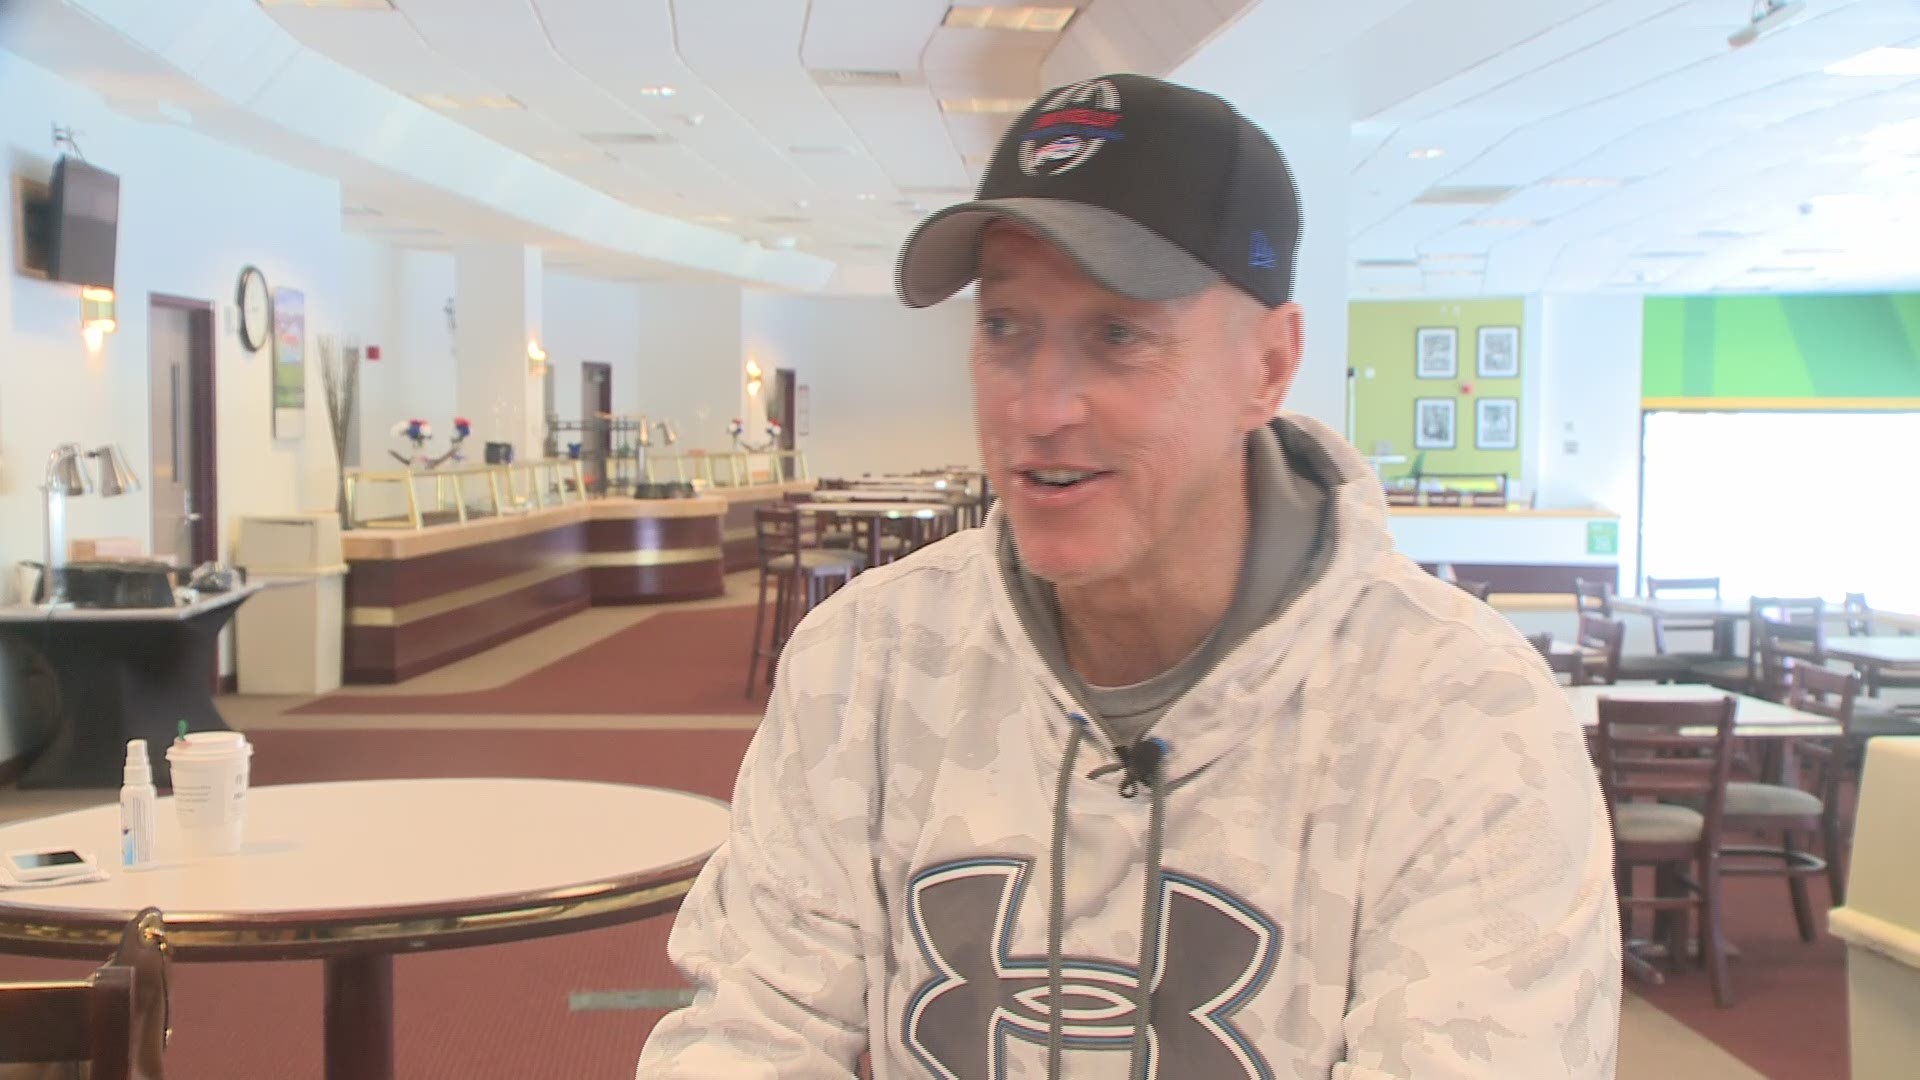 Jim Kelly sits down with 2 On Your Side's Claudine Ewing to talk about his 30th football camp, his health and life.